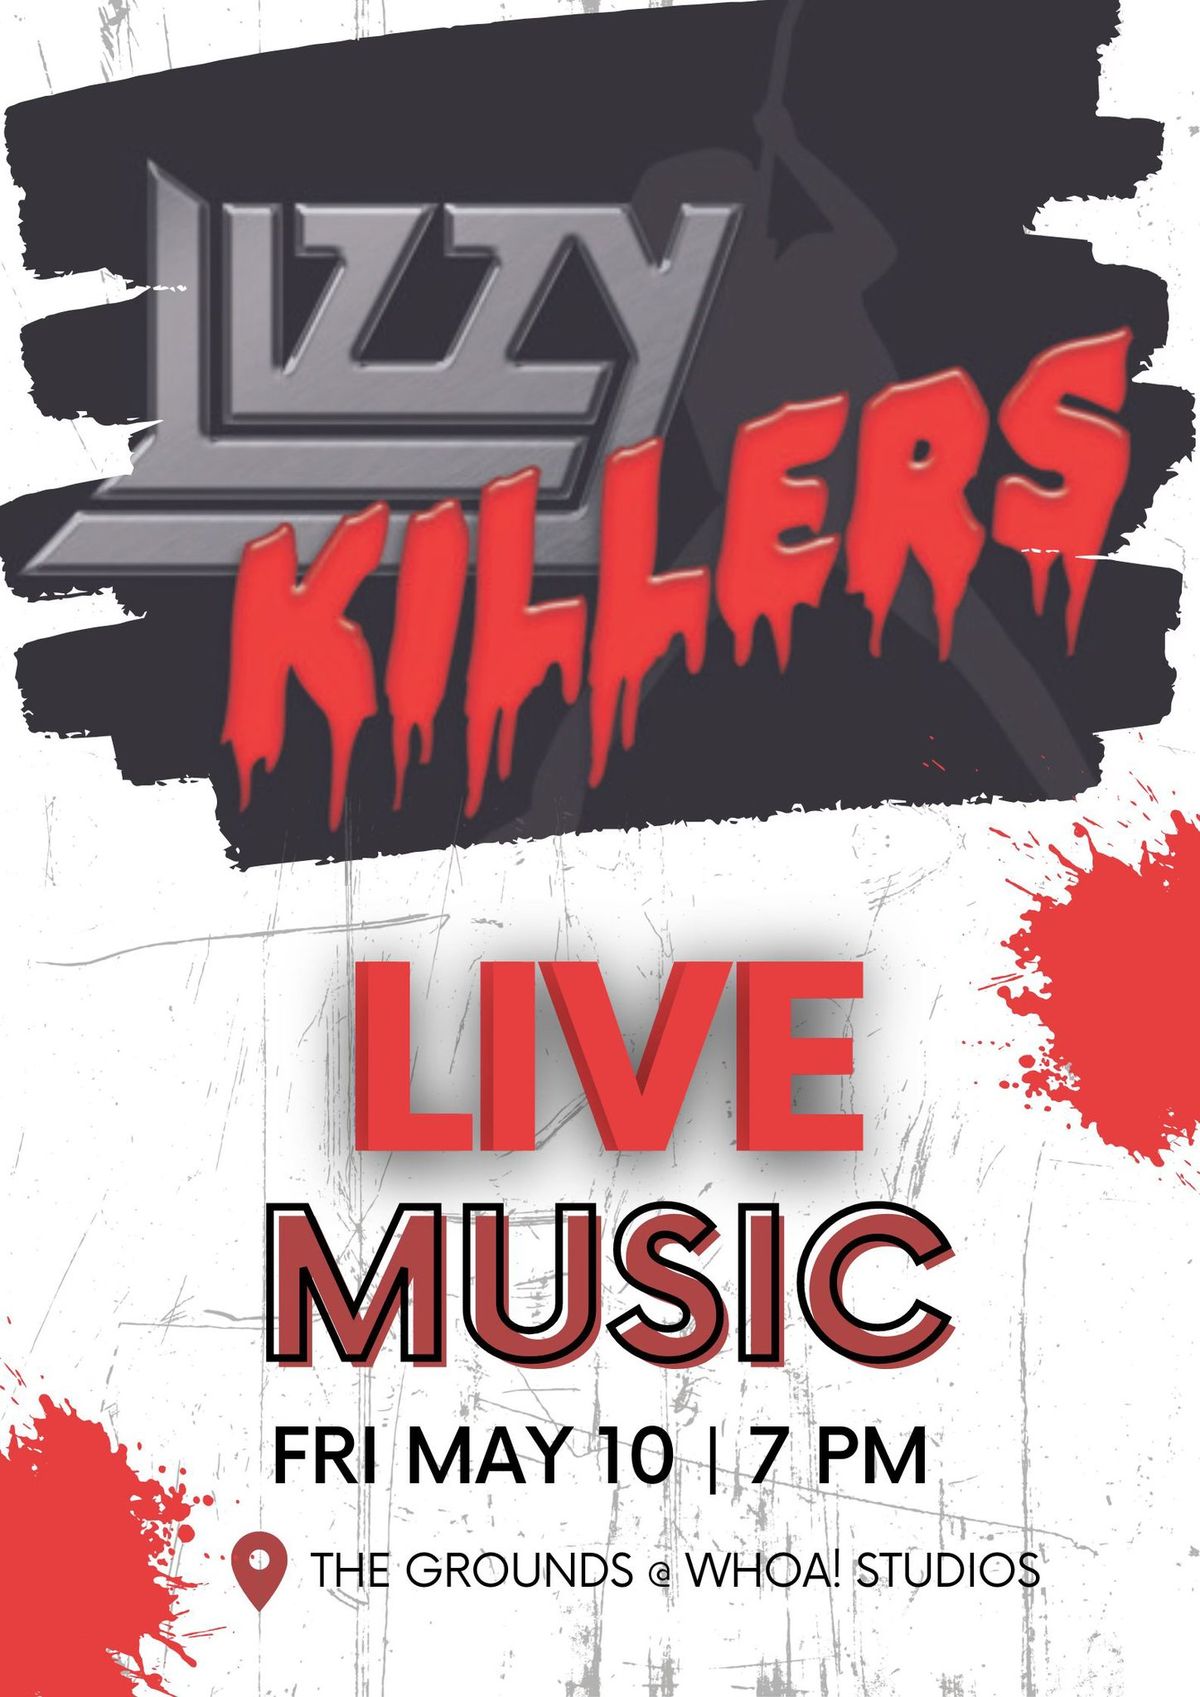 LIVE BAND - LIZZY Killers